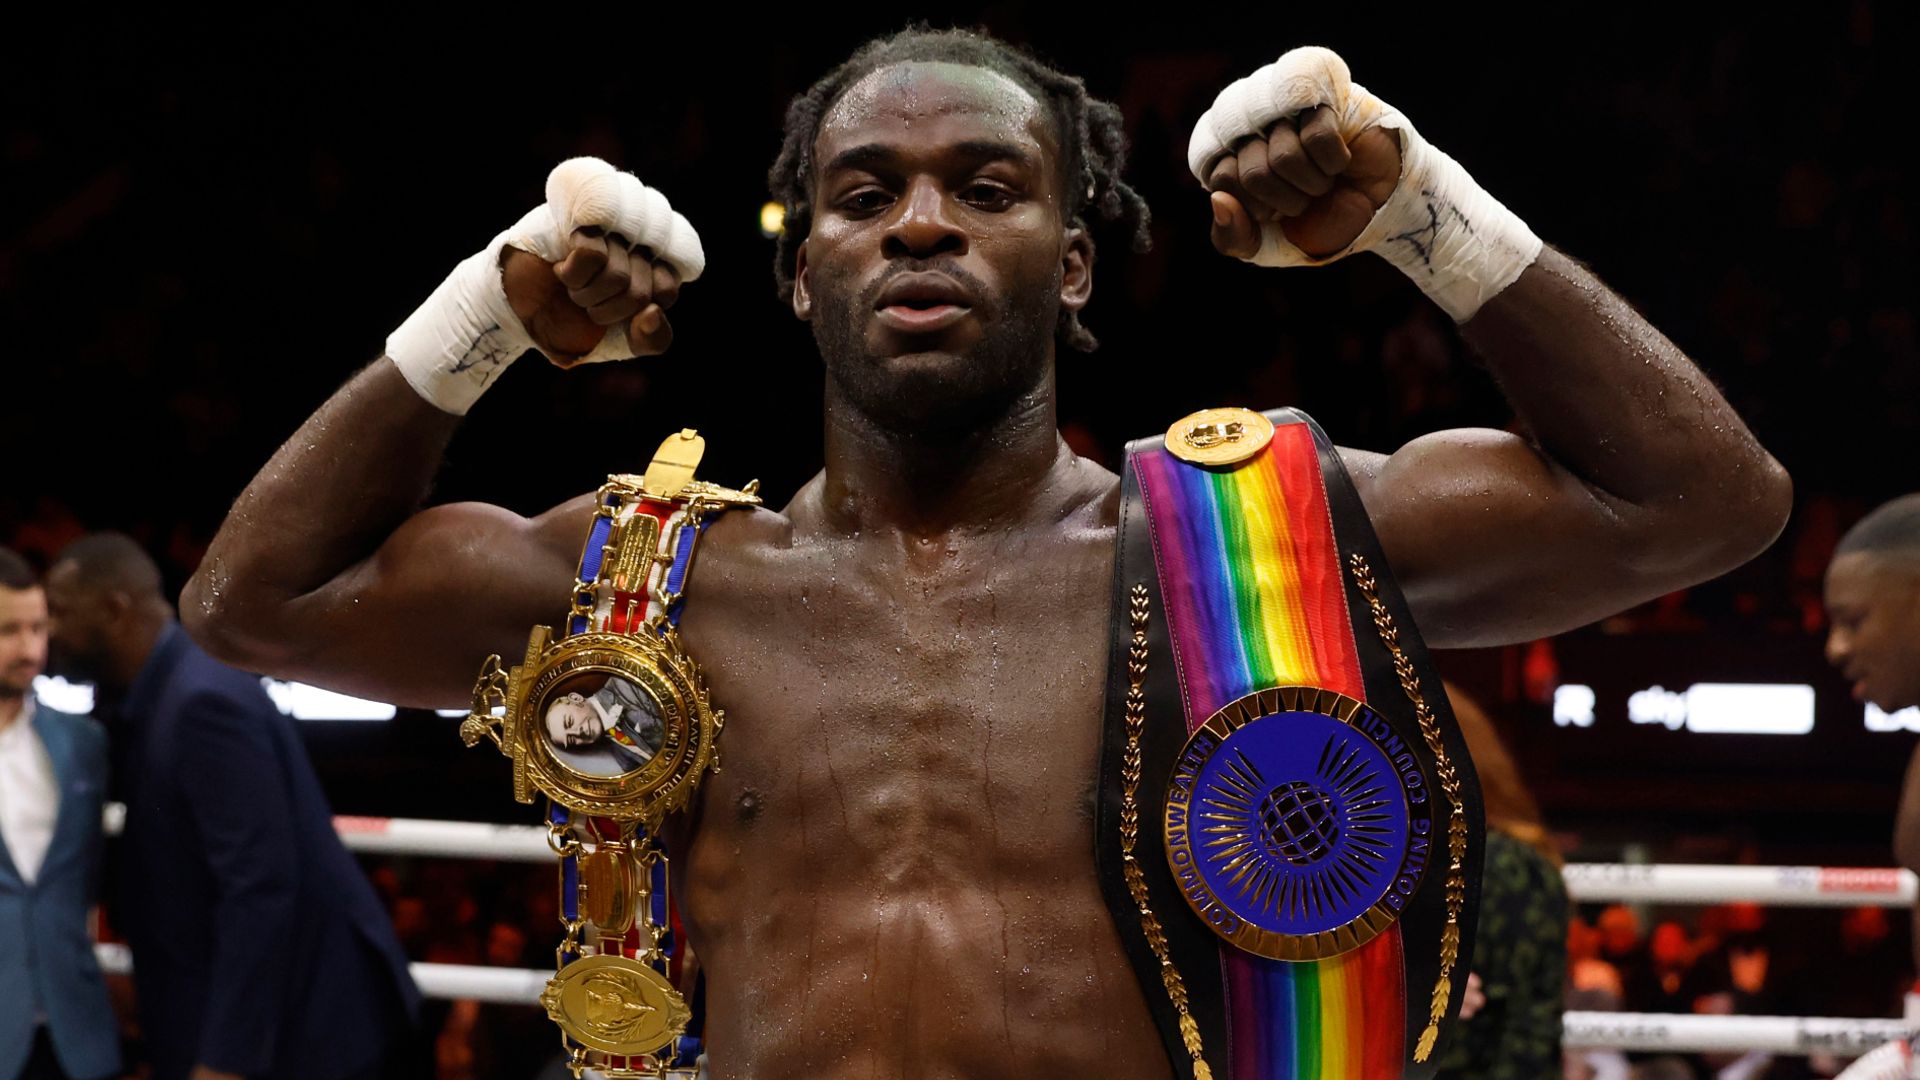 Buatsi 'absolutely' would fight Yarde next as he waits for title shot